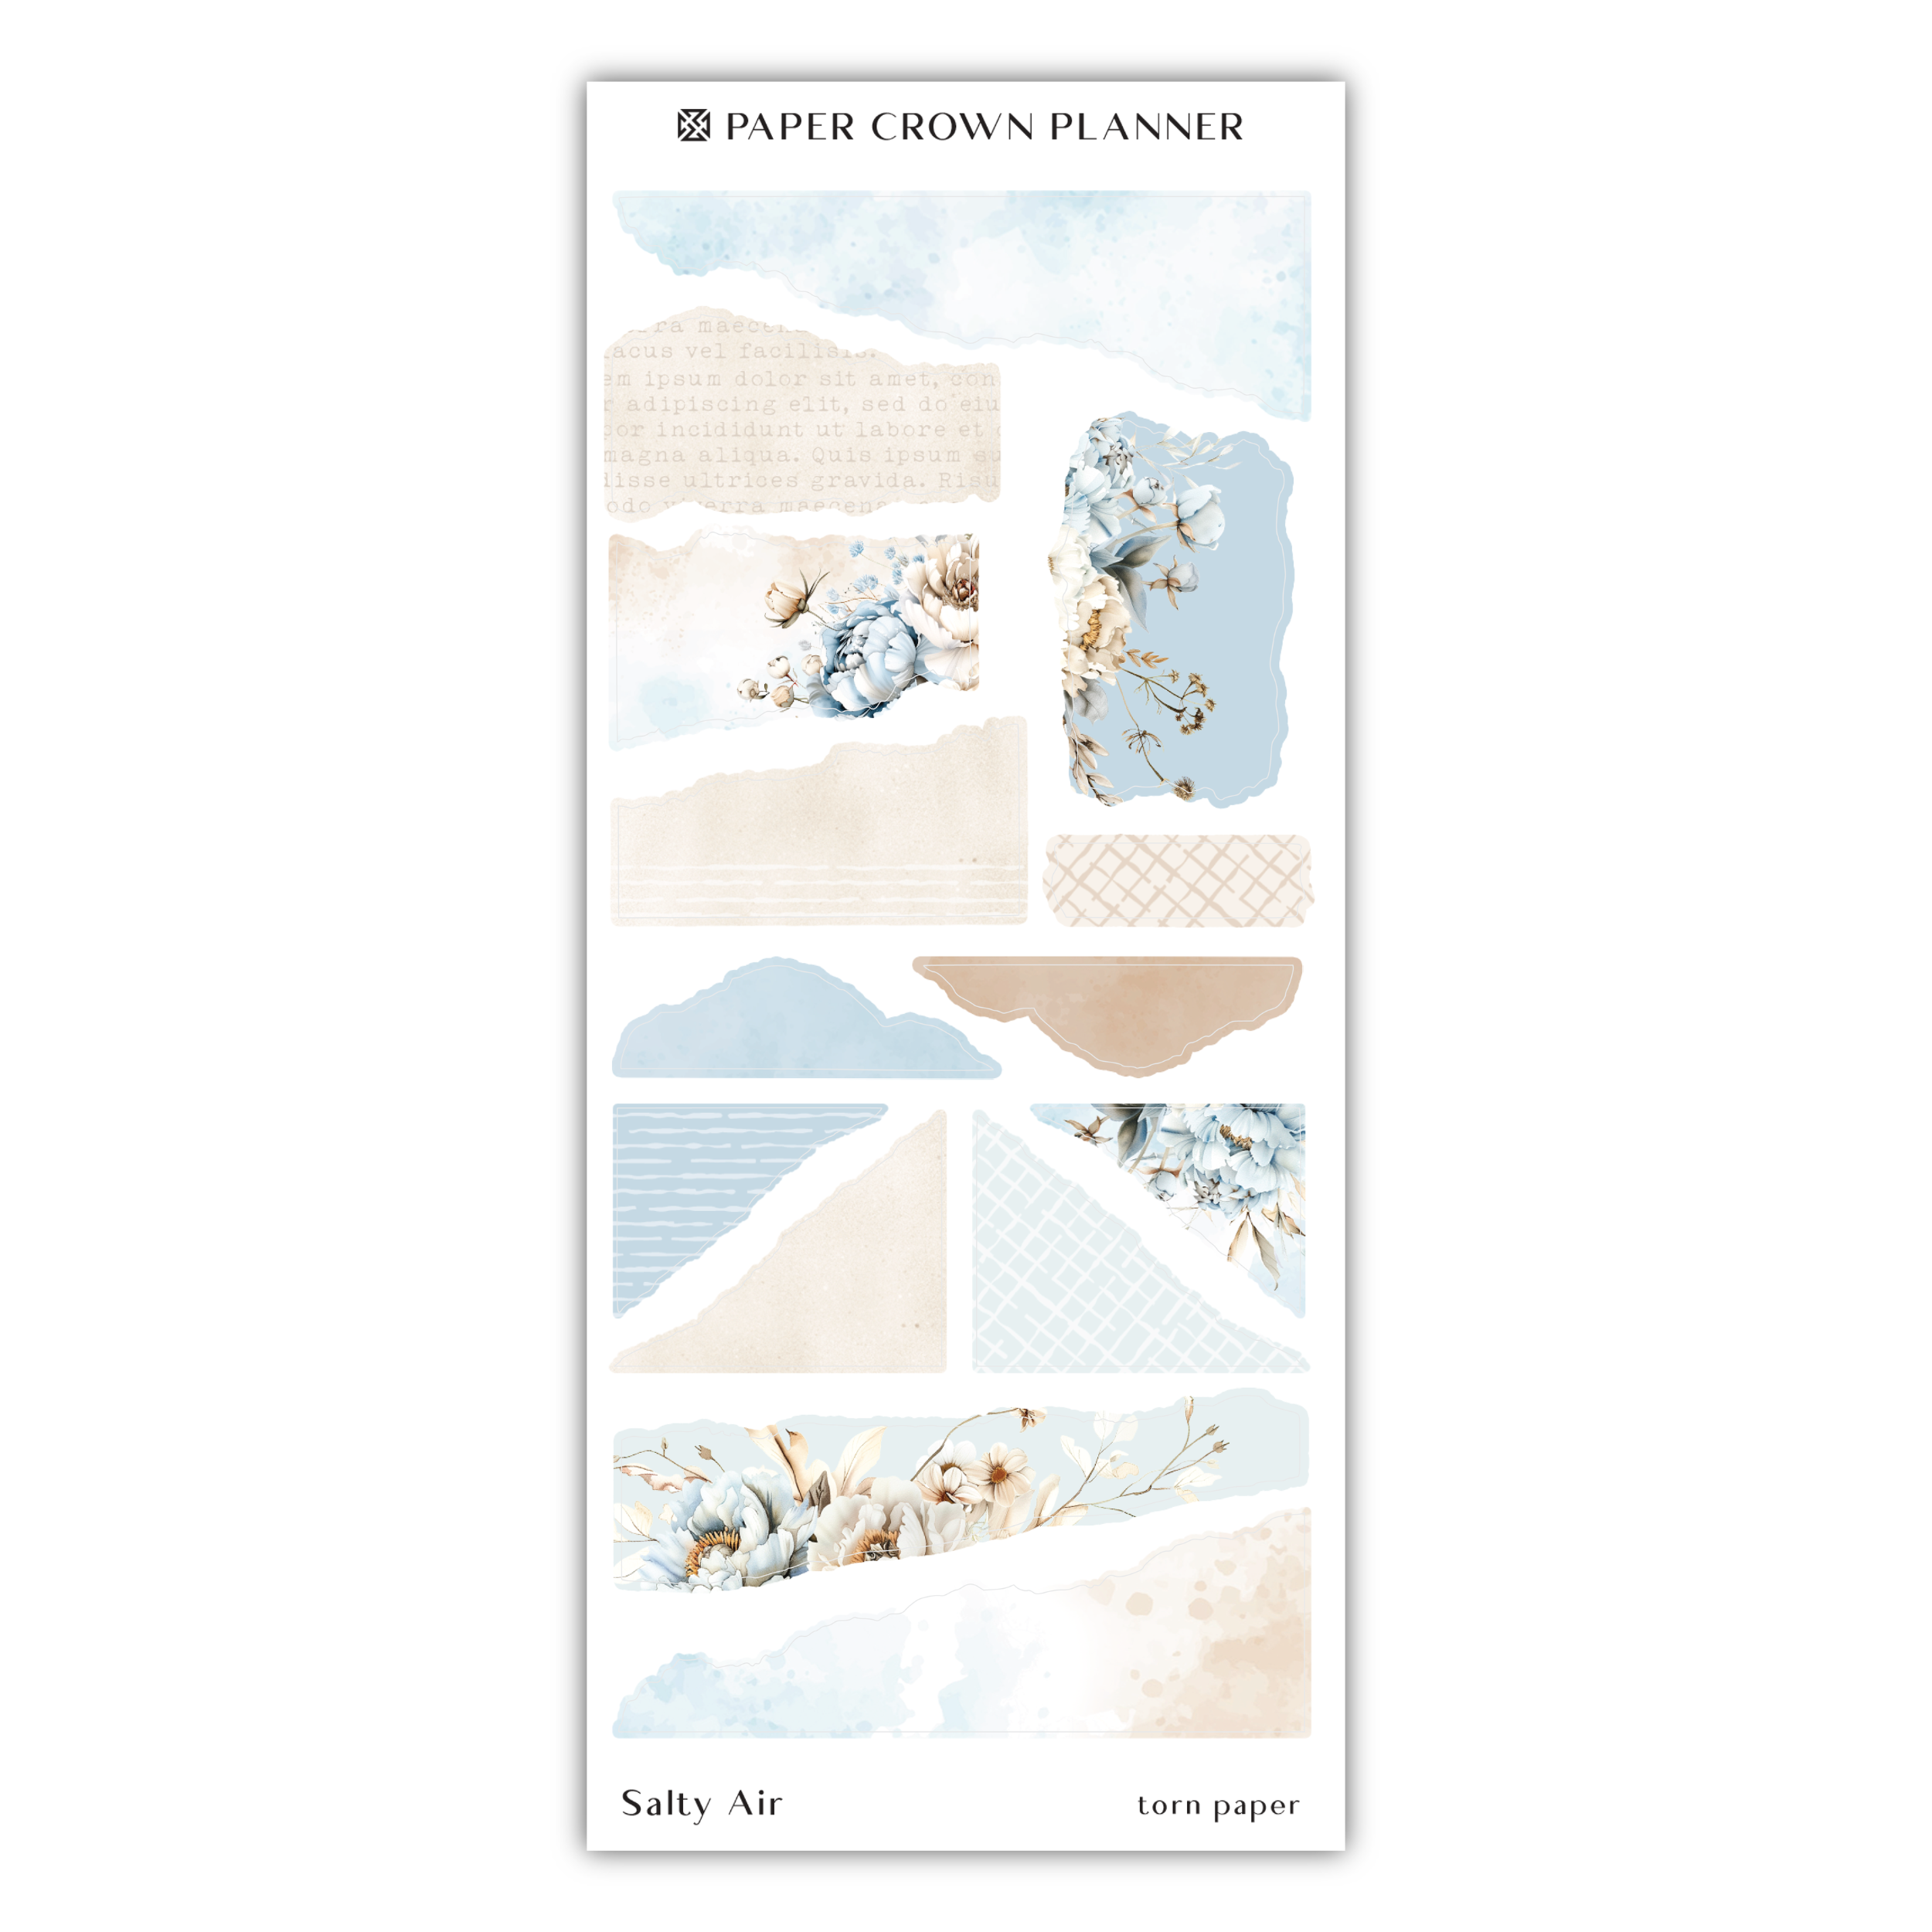 the paper crown planner stickers are blue and white